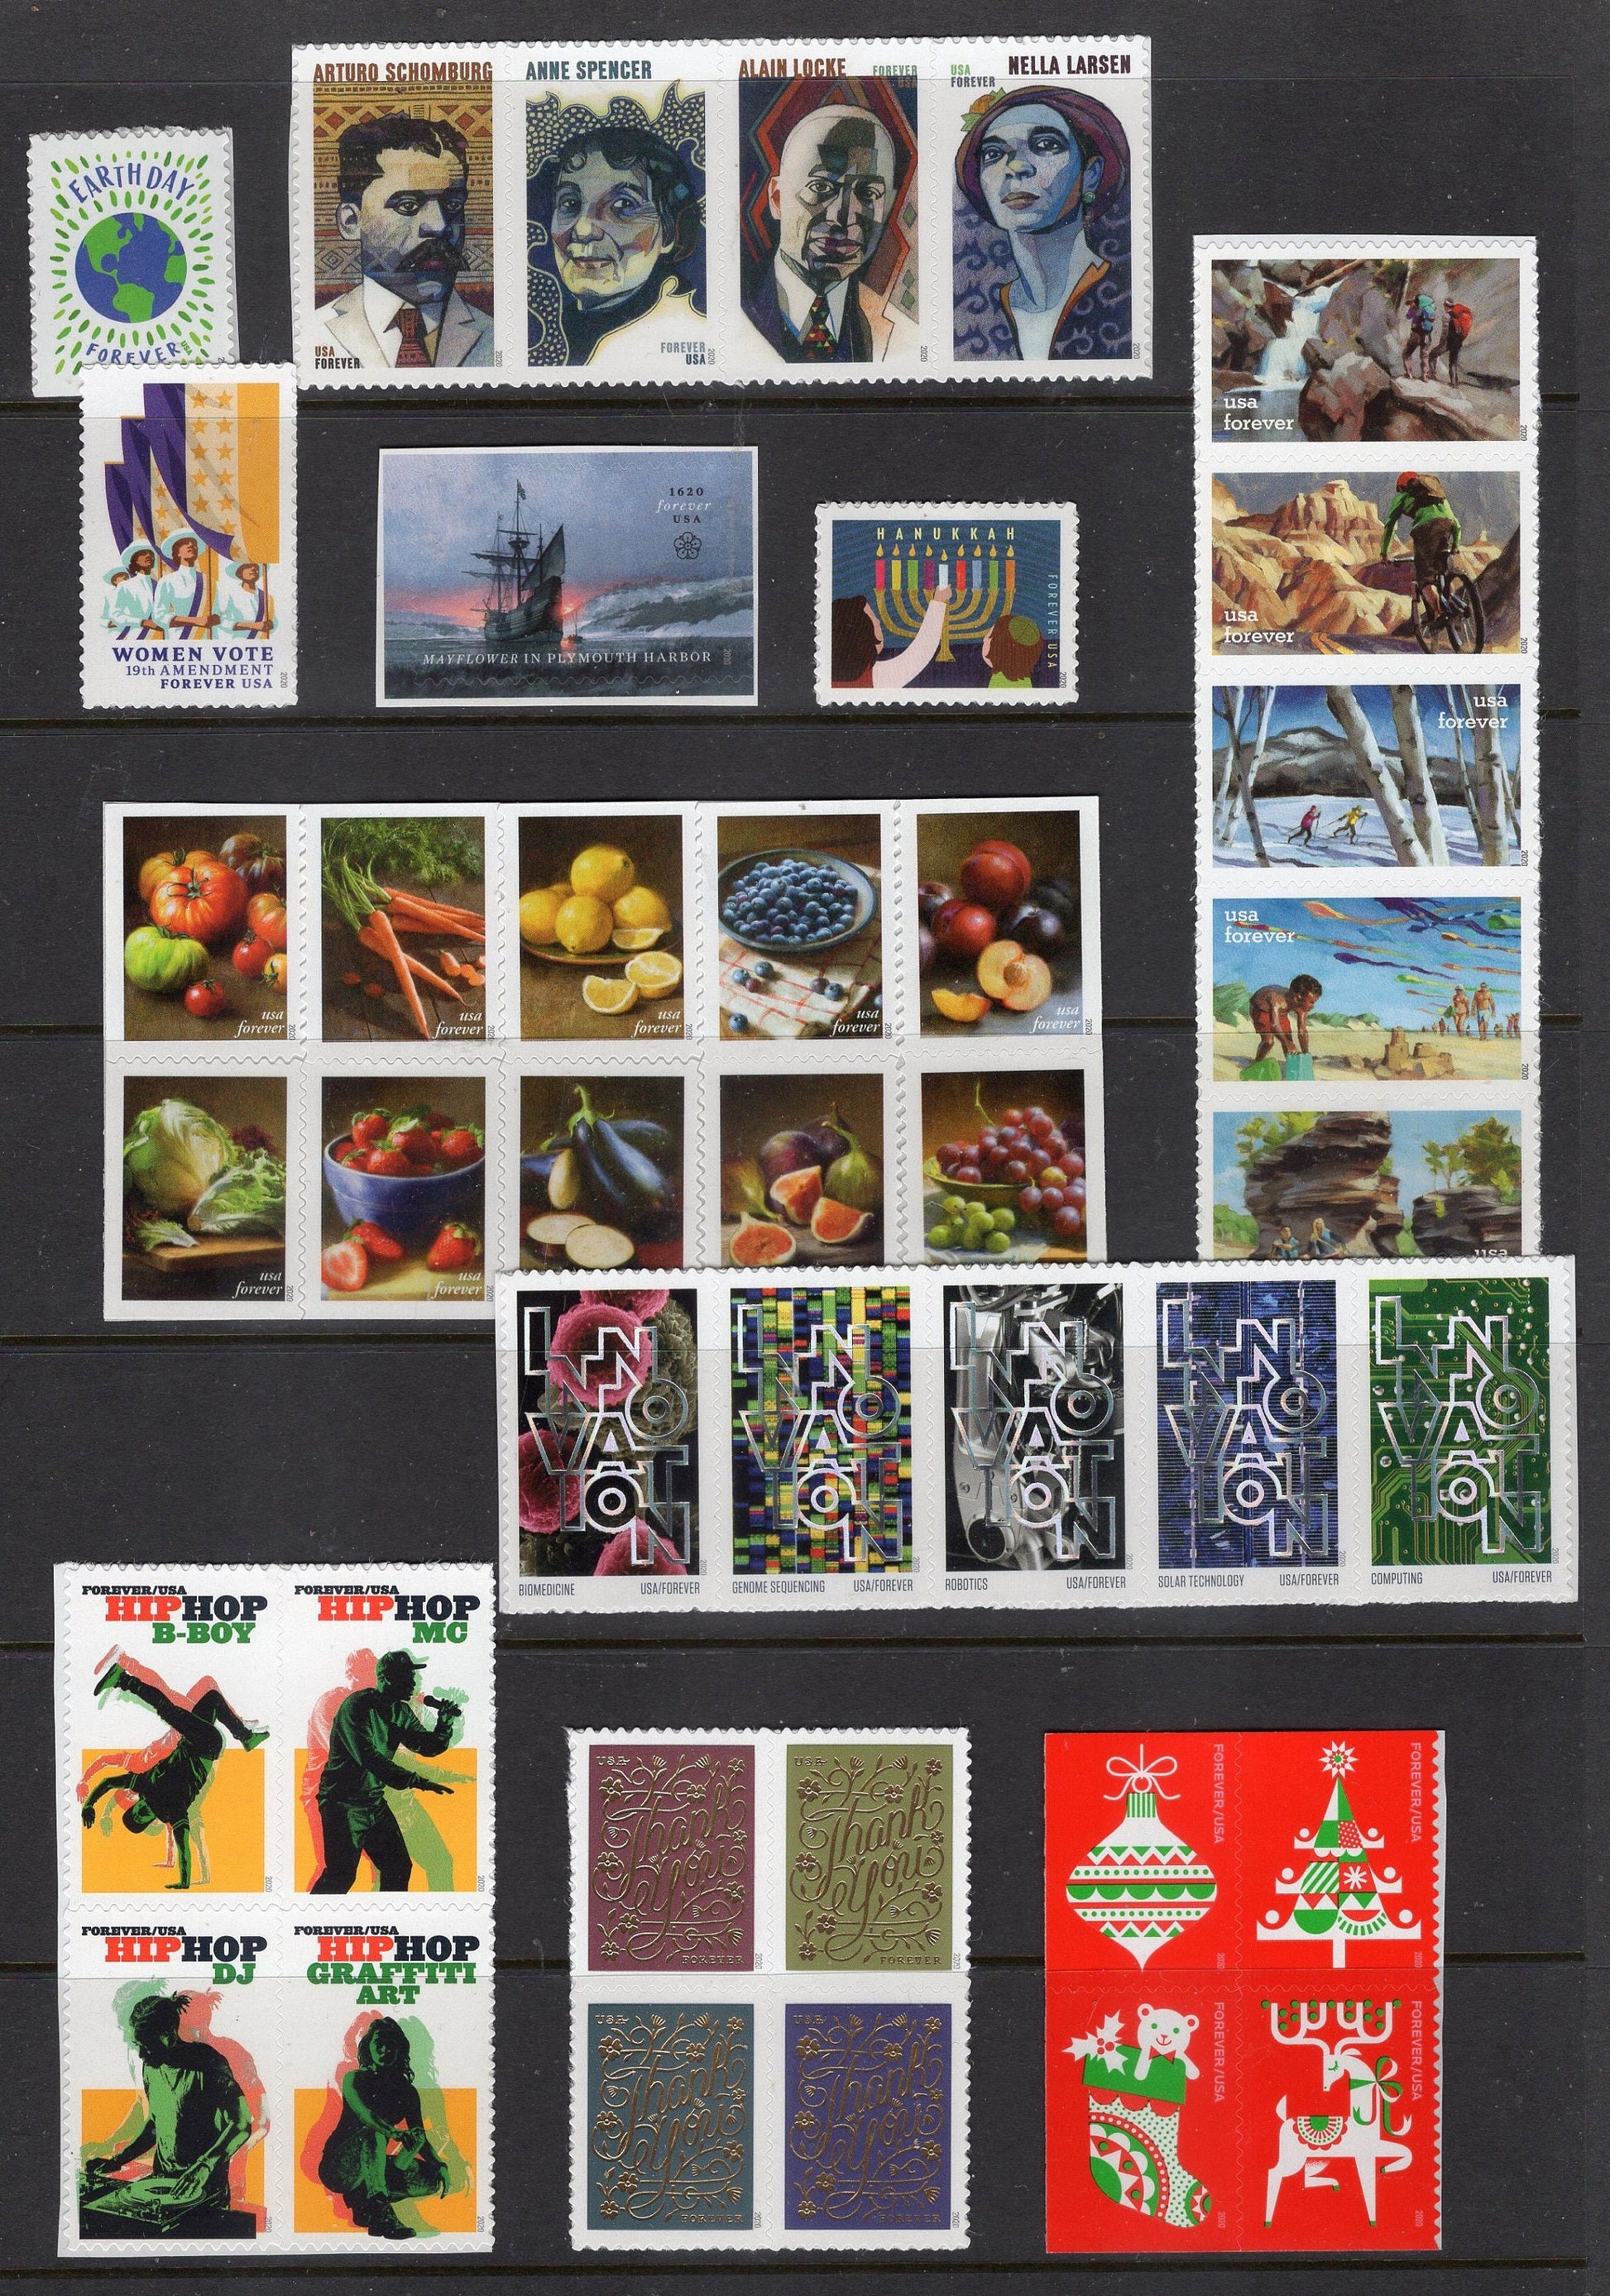 UNITED STATES 2020 COLLECTION All 115 Stamps Issued in in Year 2020 Set - Unused, Mint, Fresh - Issued in 2020 - sY -